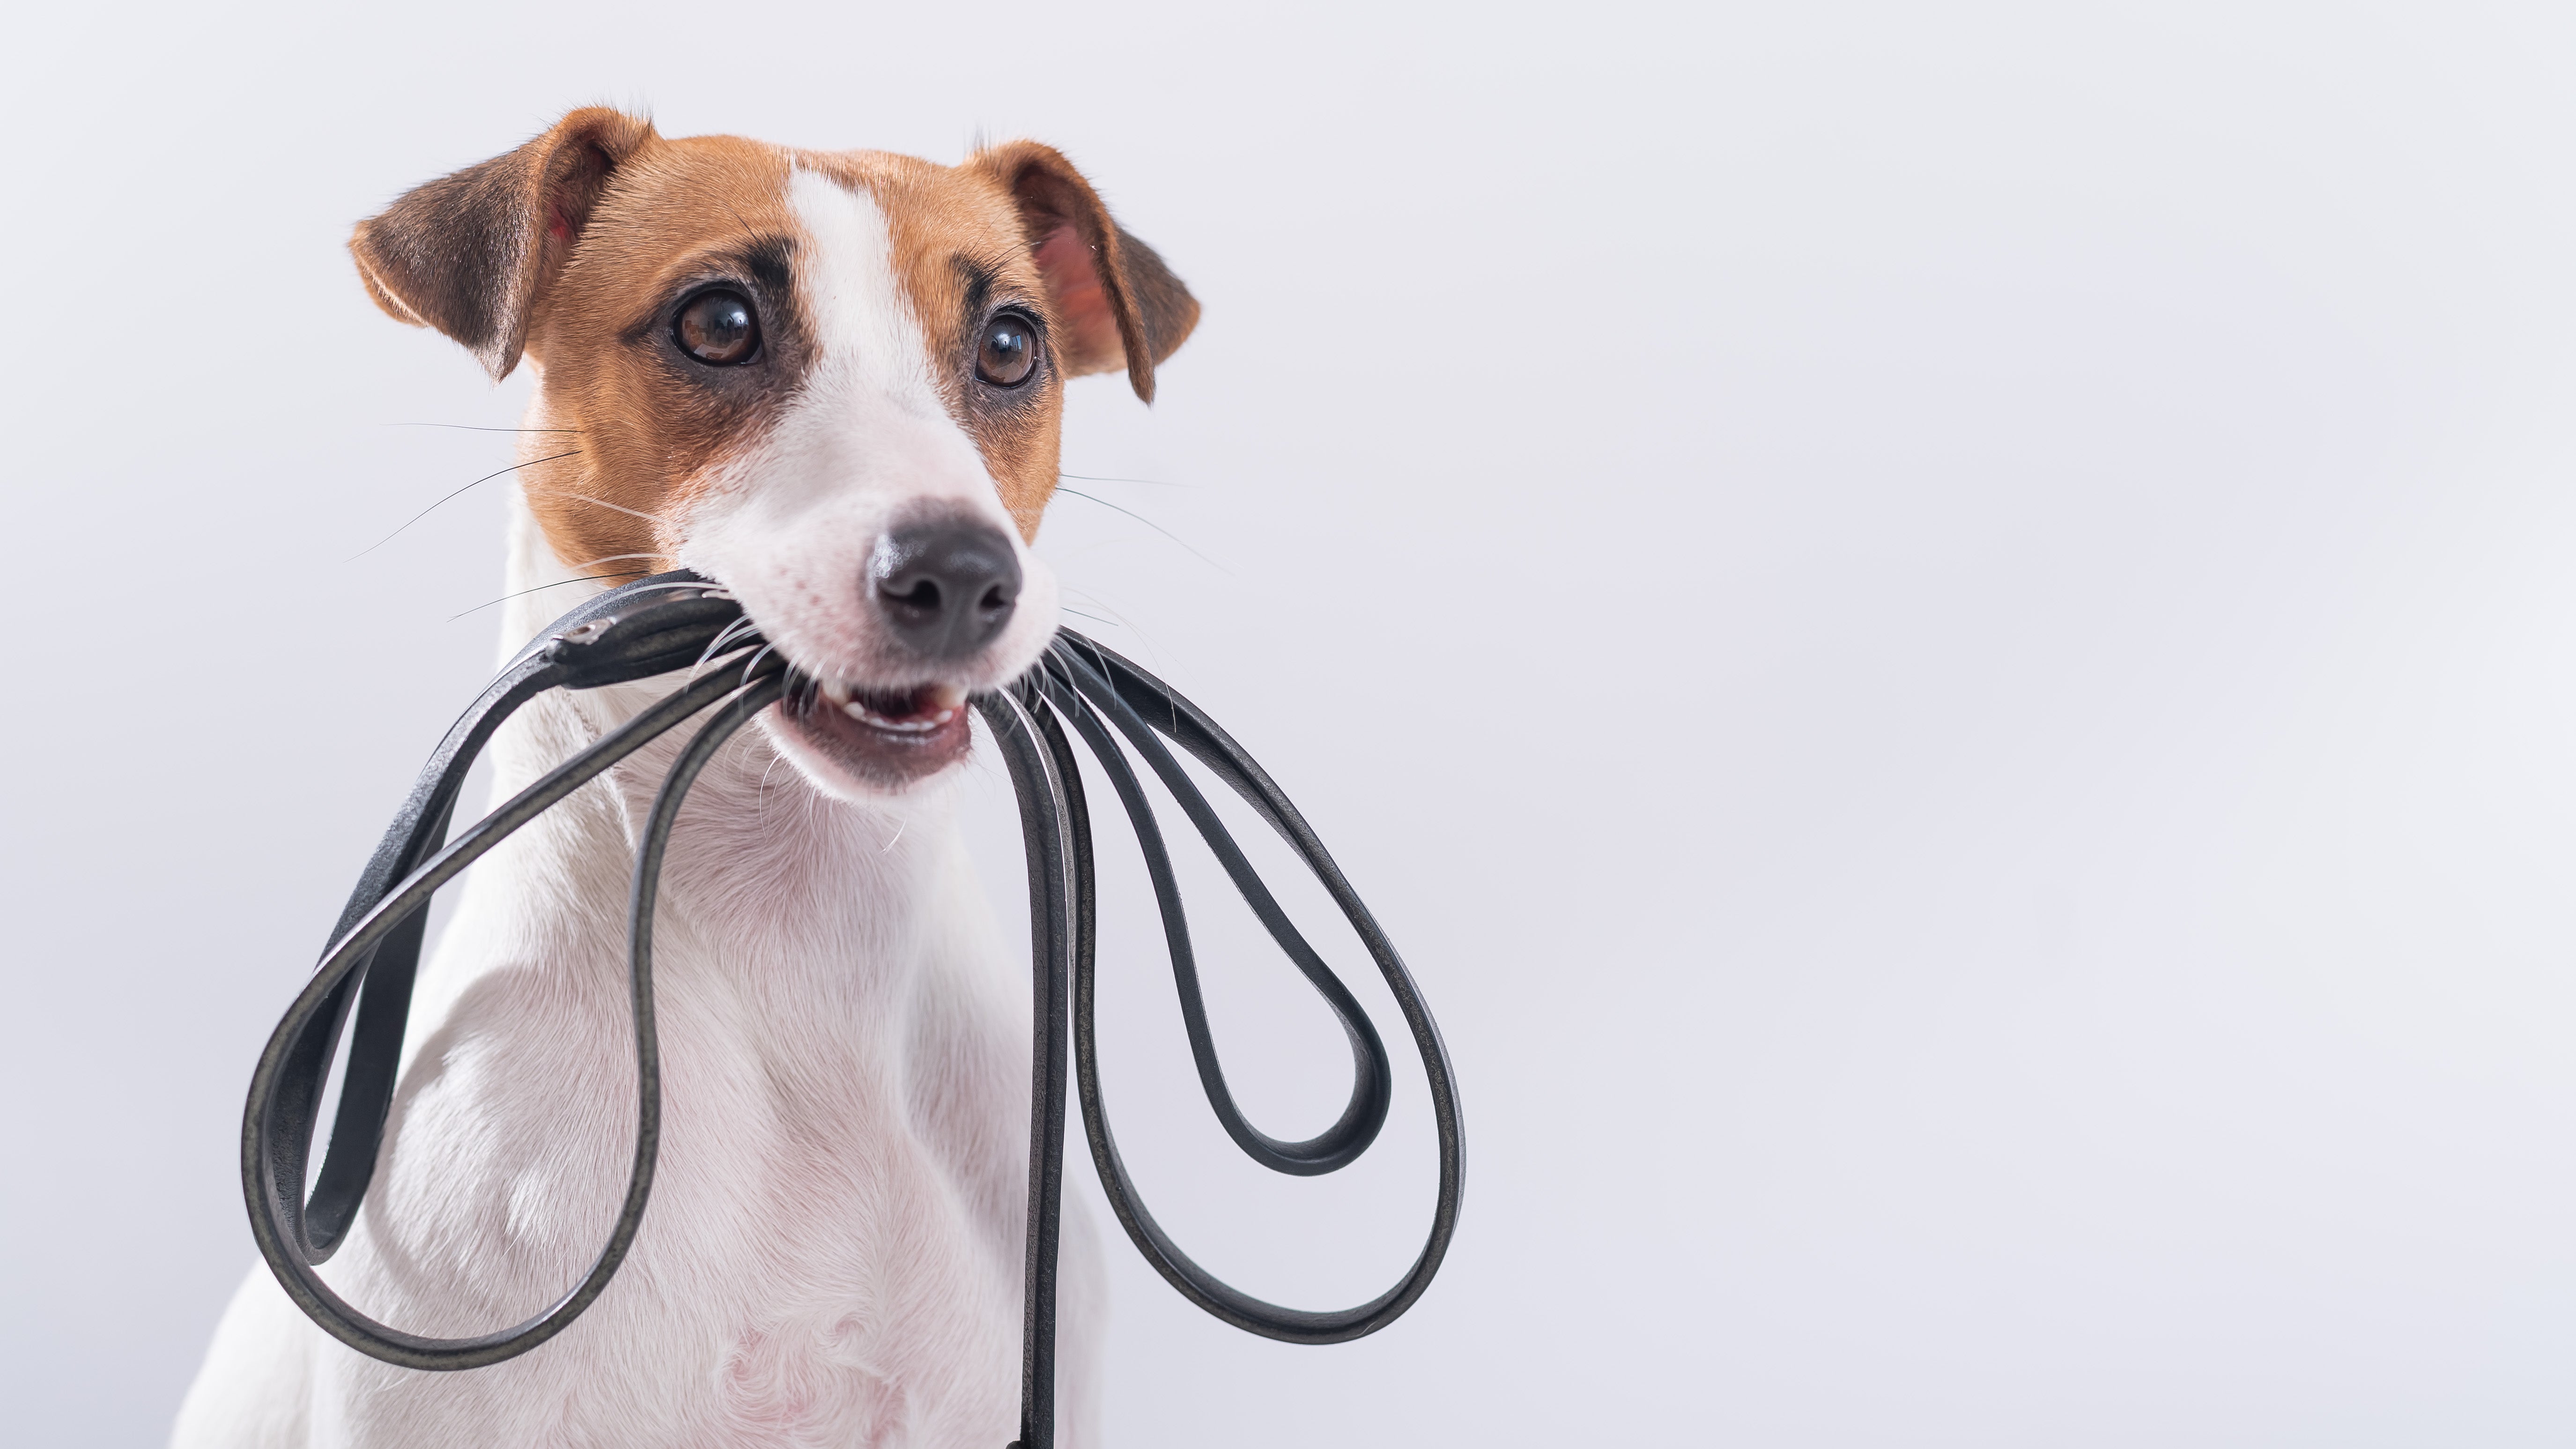 5 Popular Types of Dog Leashes for Daily Use